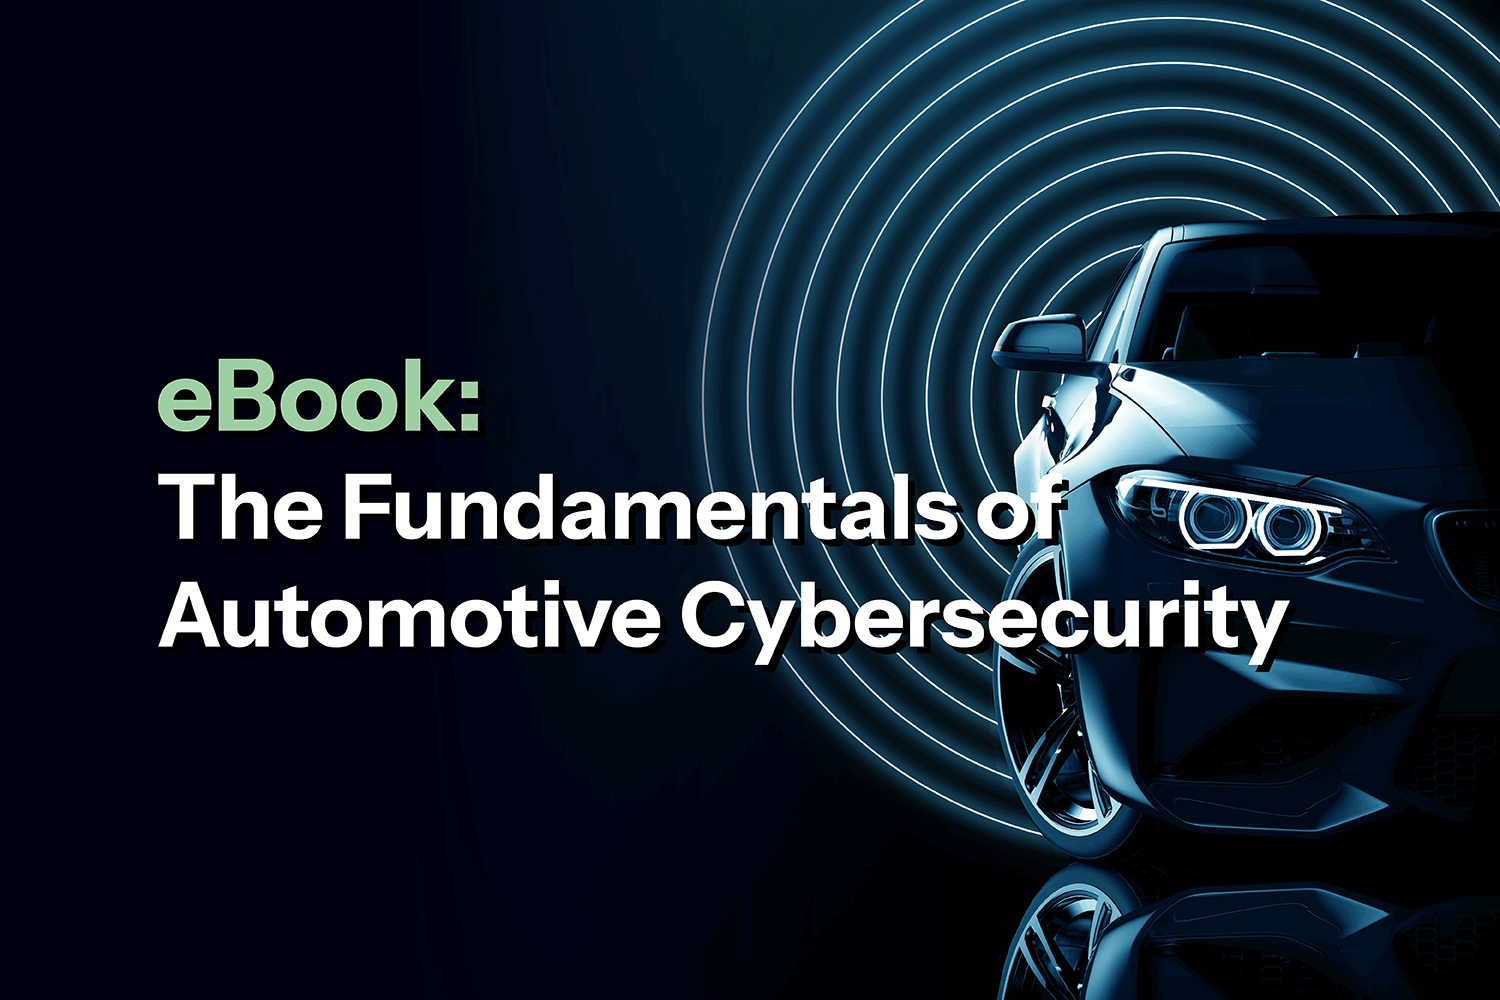 LSS-Knowledge-Center-eBook-The-Fundamentals-of-Automotive-Cybersecurity-Card-Image-02